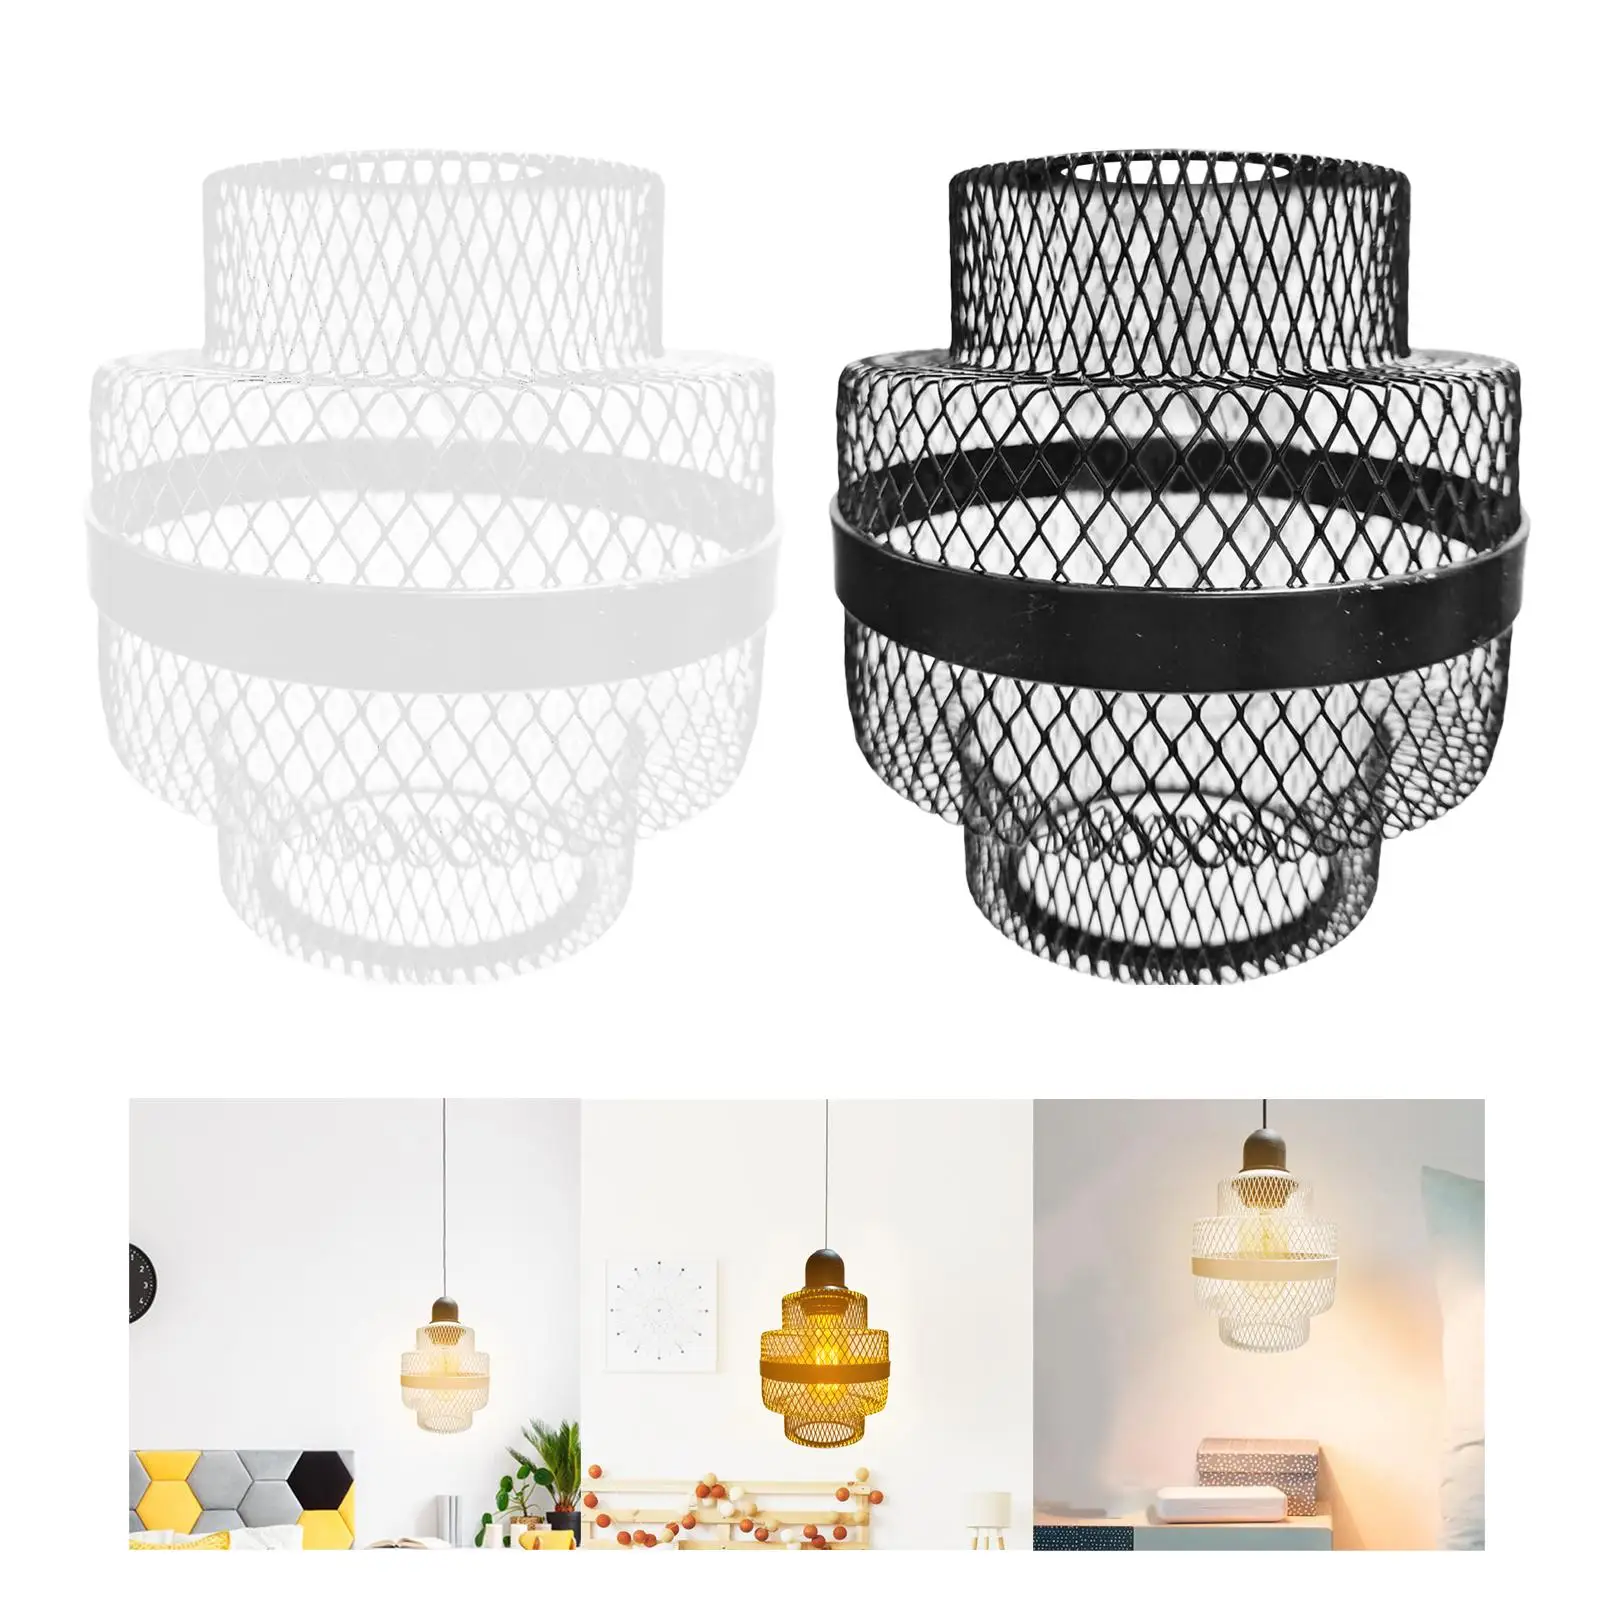 Ceiling Light Fixtures Lamp Shade Fitting Metal Wire Light Cage Cover Hanging Pendant Light Cover for Floor Lamp Kitchen Island